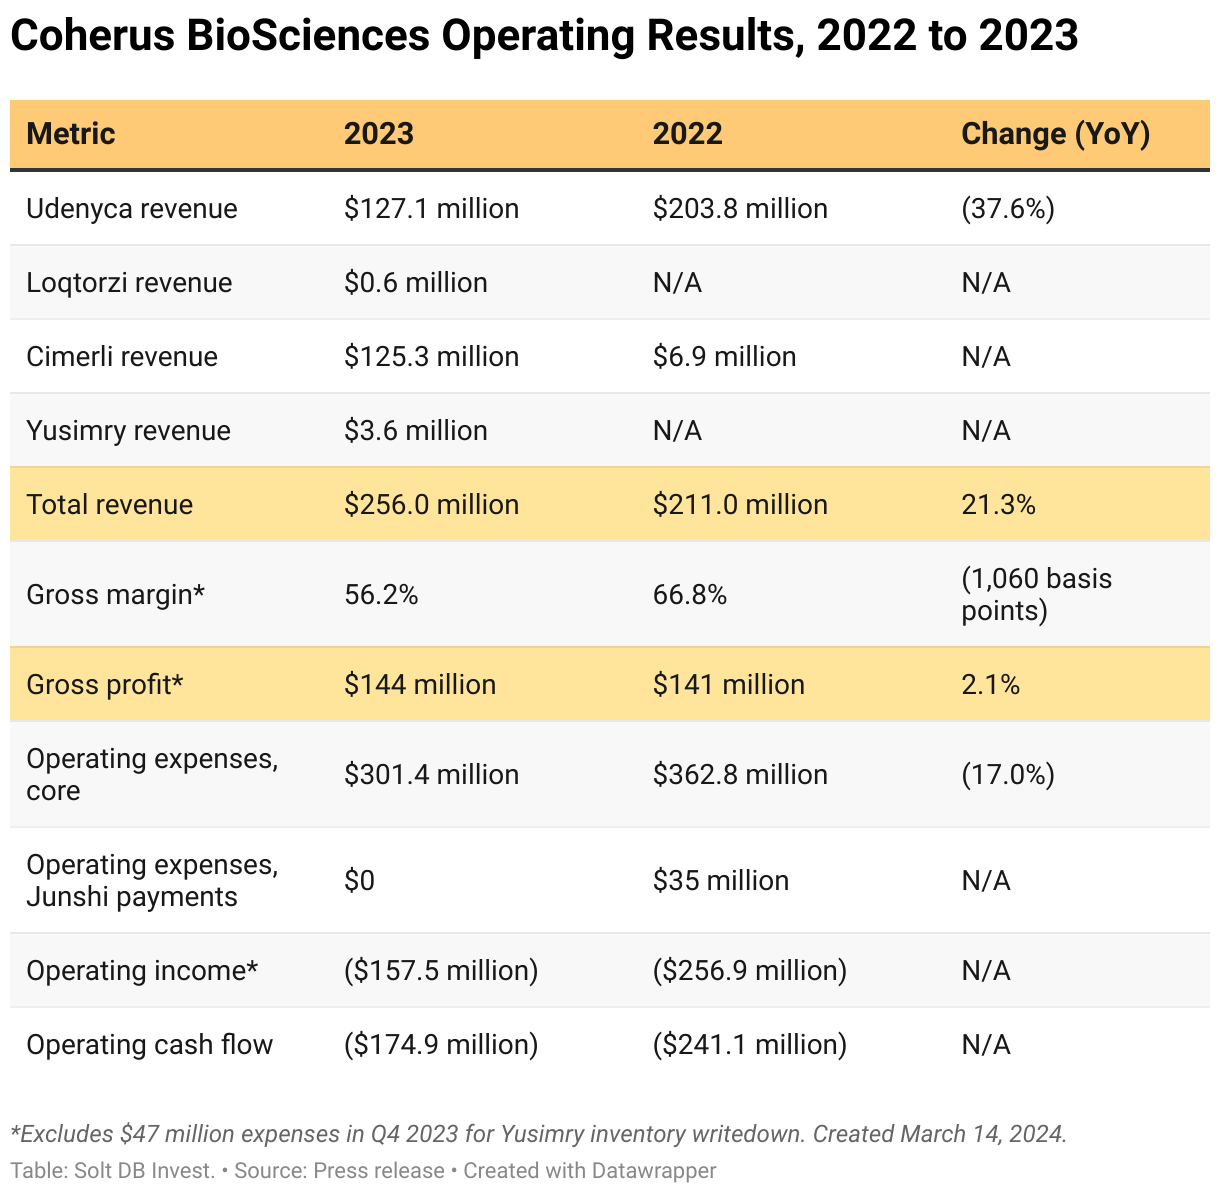 A table comparing operating results from 2022 to 2023 for Coherus BioSciences.